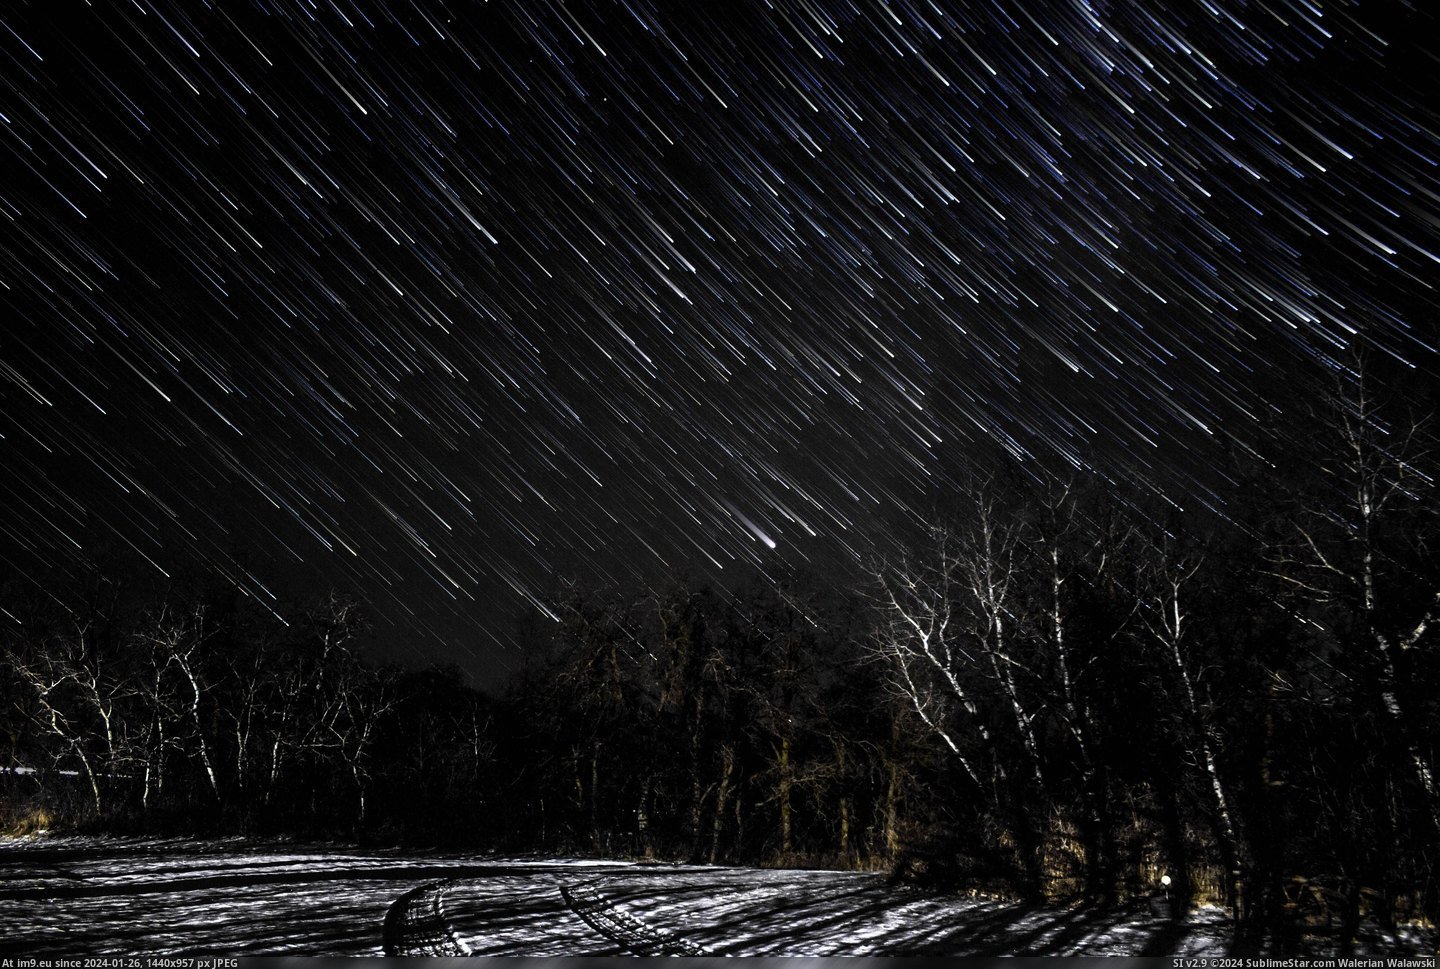 #Star #Canada #Showers #Manitoba #5184x3456 #Snowy [Earthporn] Snowy Star Showers in Manitoba Canada [5184x3456] Pic. (Image of album My r/EARTHPORN favs))